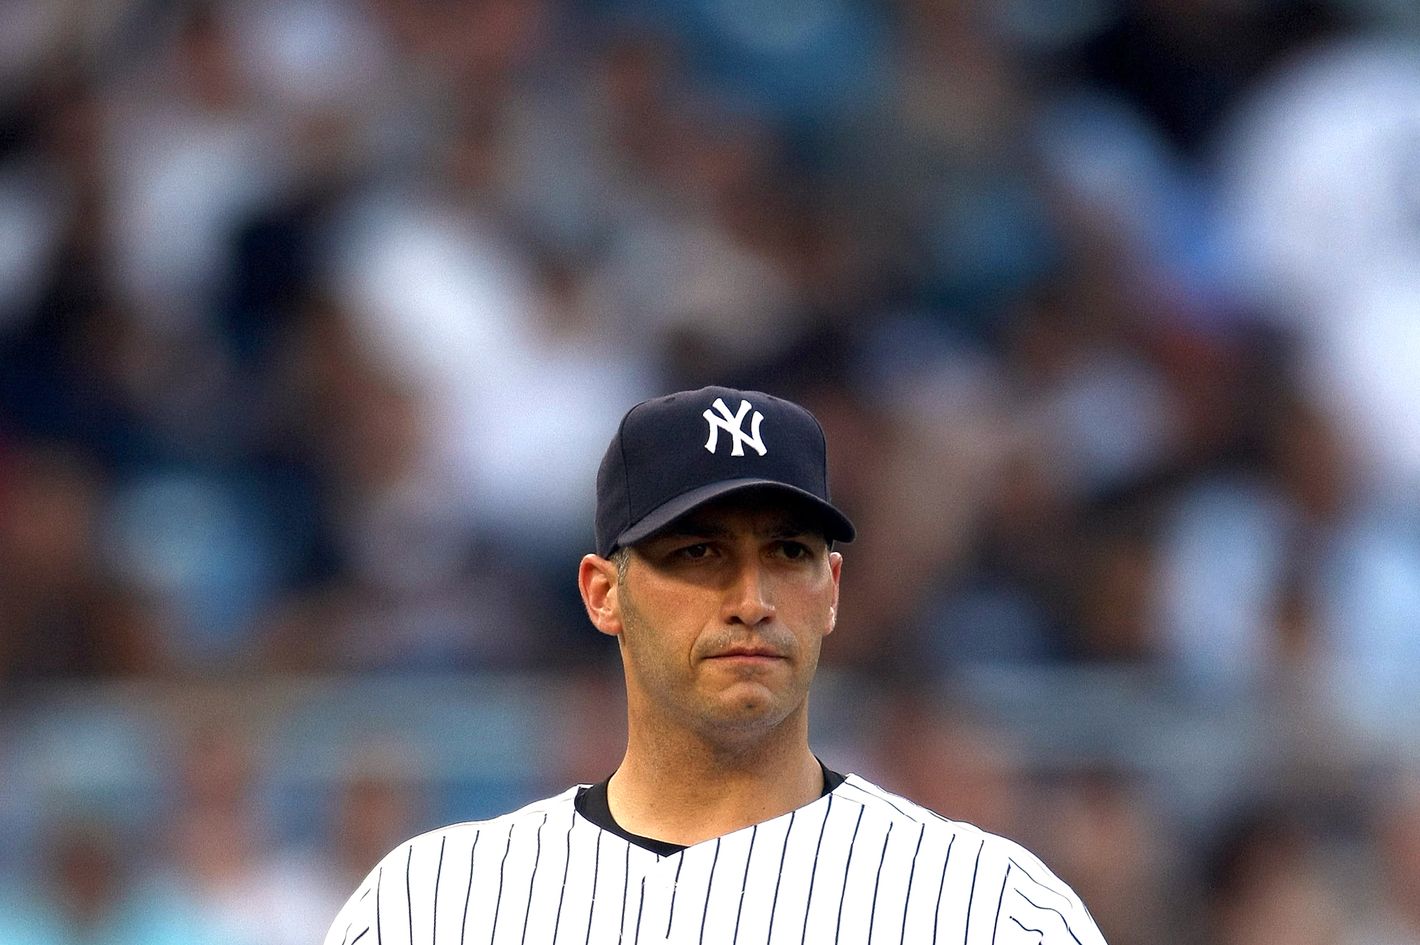 Andy Pettitte finally gets his WBC coaching moment